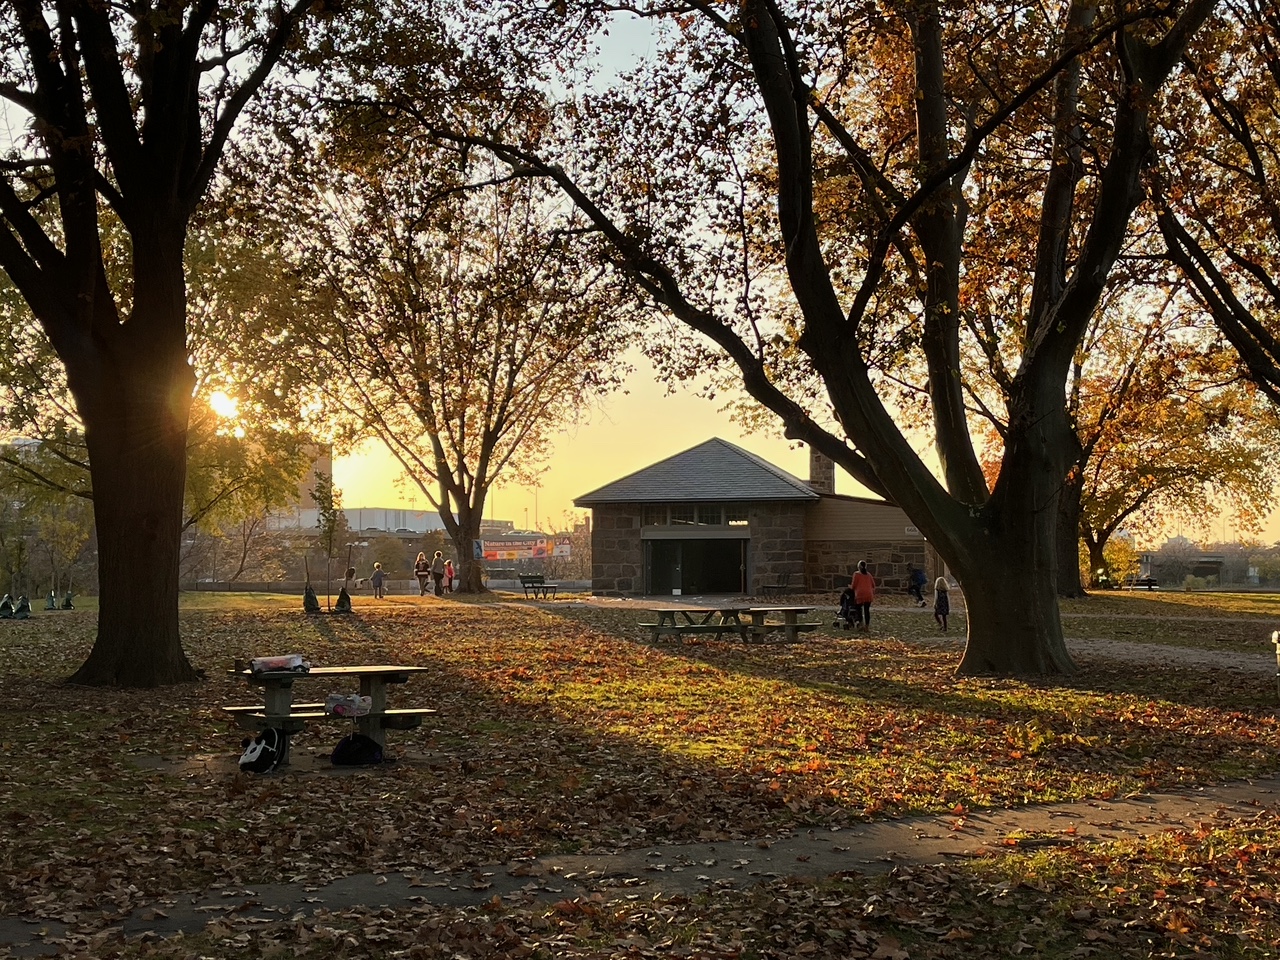 Photo of Magazine Beach and the brick Powder House with the sunset streaming light through the trees and fallen leaves in autumn. People and children are around the picnic tables and the cityscape can be seen across the river.